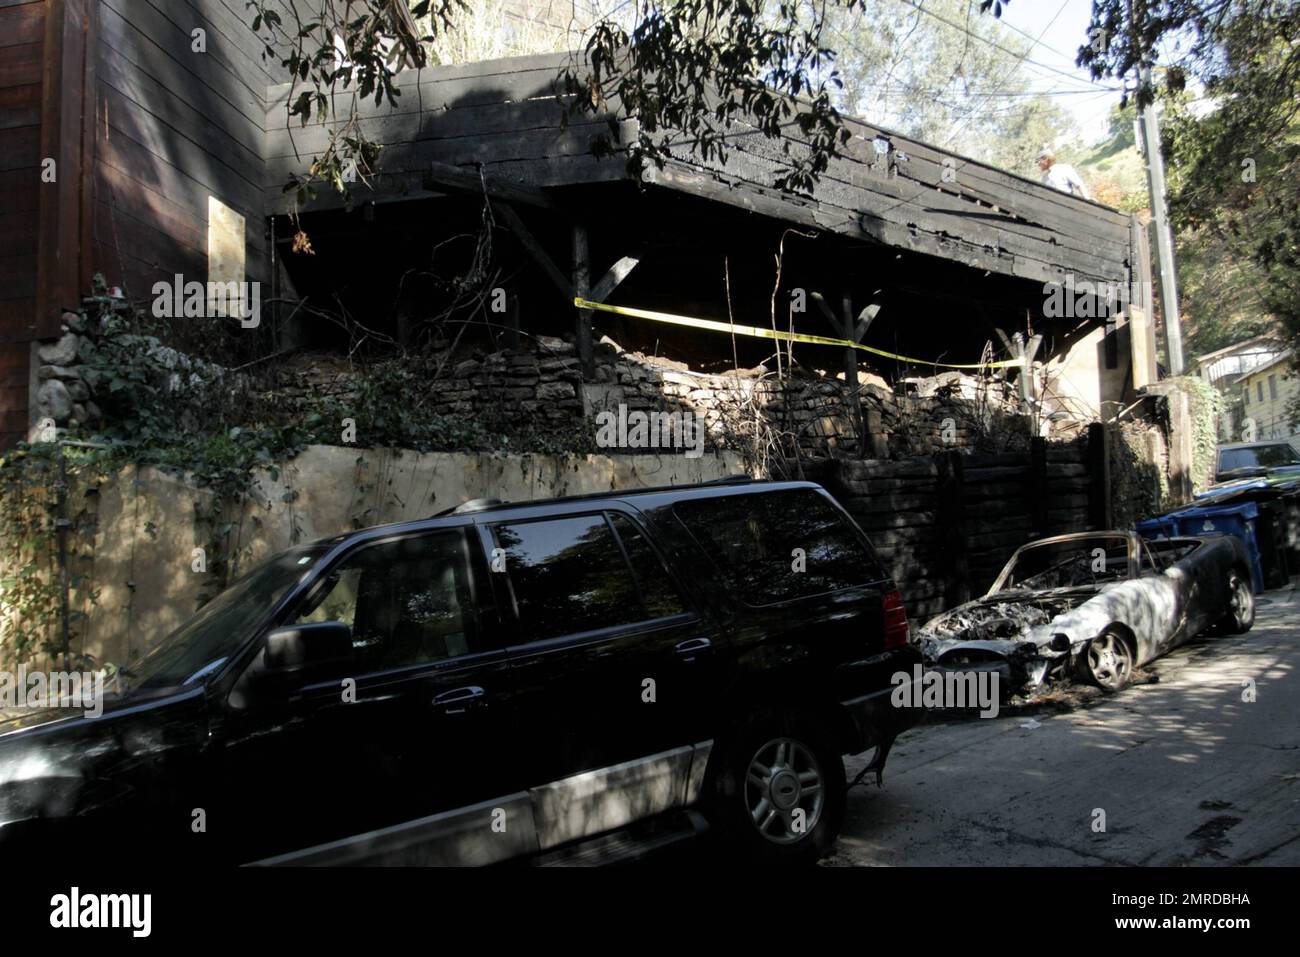 General views of rock legend Jim Morrison's former home after it was damaged by fire. The 1922 Hollywood home reportedly caught fire at 1:20 a.m. after flames spread from a nearby car. The blaze took 35 minutes to contain and was battled by 56 firefighters. According to the reports, the fire was one of 19 overnight arson attacks that plagued Hollywood and West Hollywood early Friday morning. The home was where Morrison wrote The Doors' album 'Waiting for the Sun' and portions of 'The Soft Parade.' The street on which it is located was the insporation for the song 'Love Street,' which was featu Stock Photo